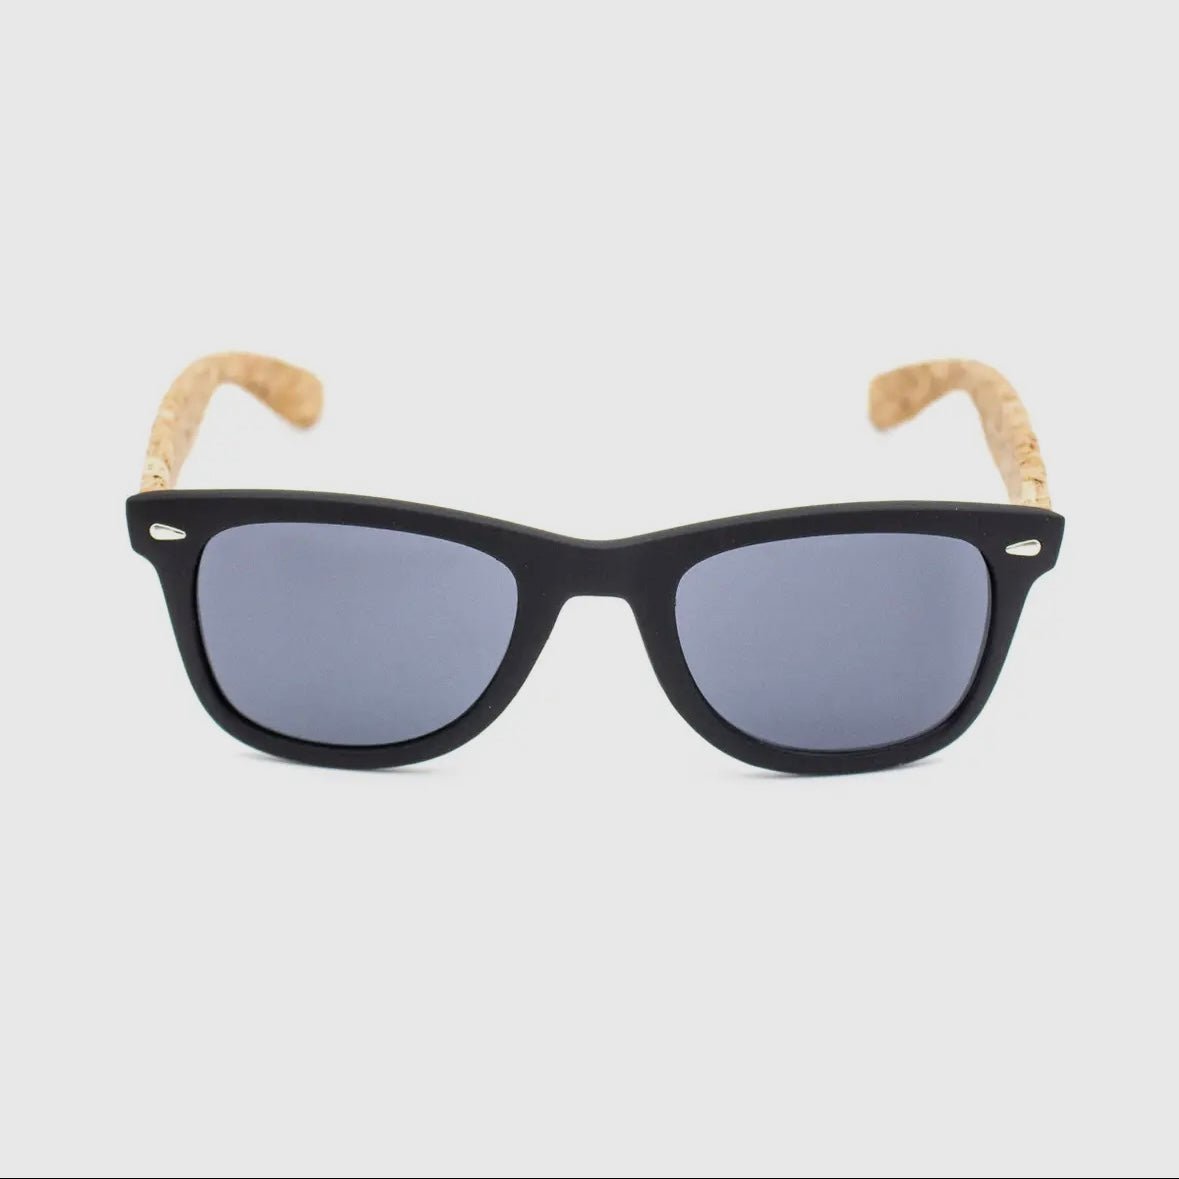 Front view of Black Rimmed Cork UV Sunglasses with arms extended - Texas Cork Company